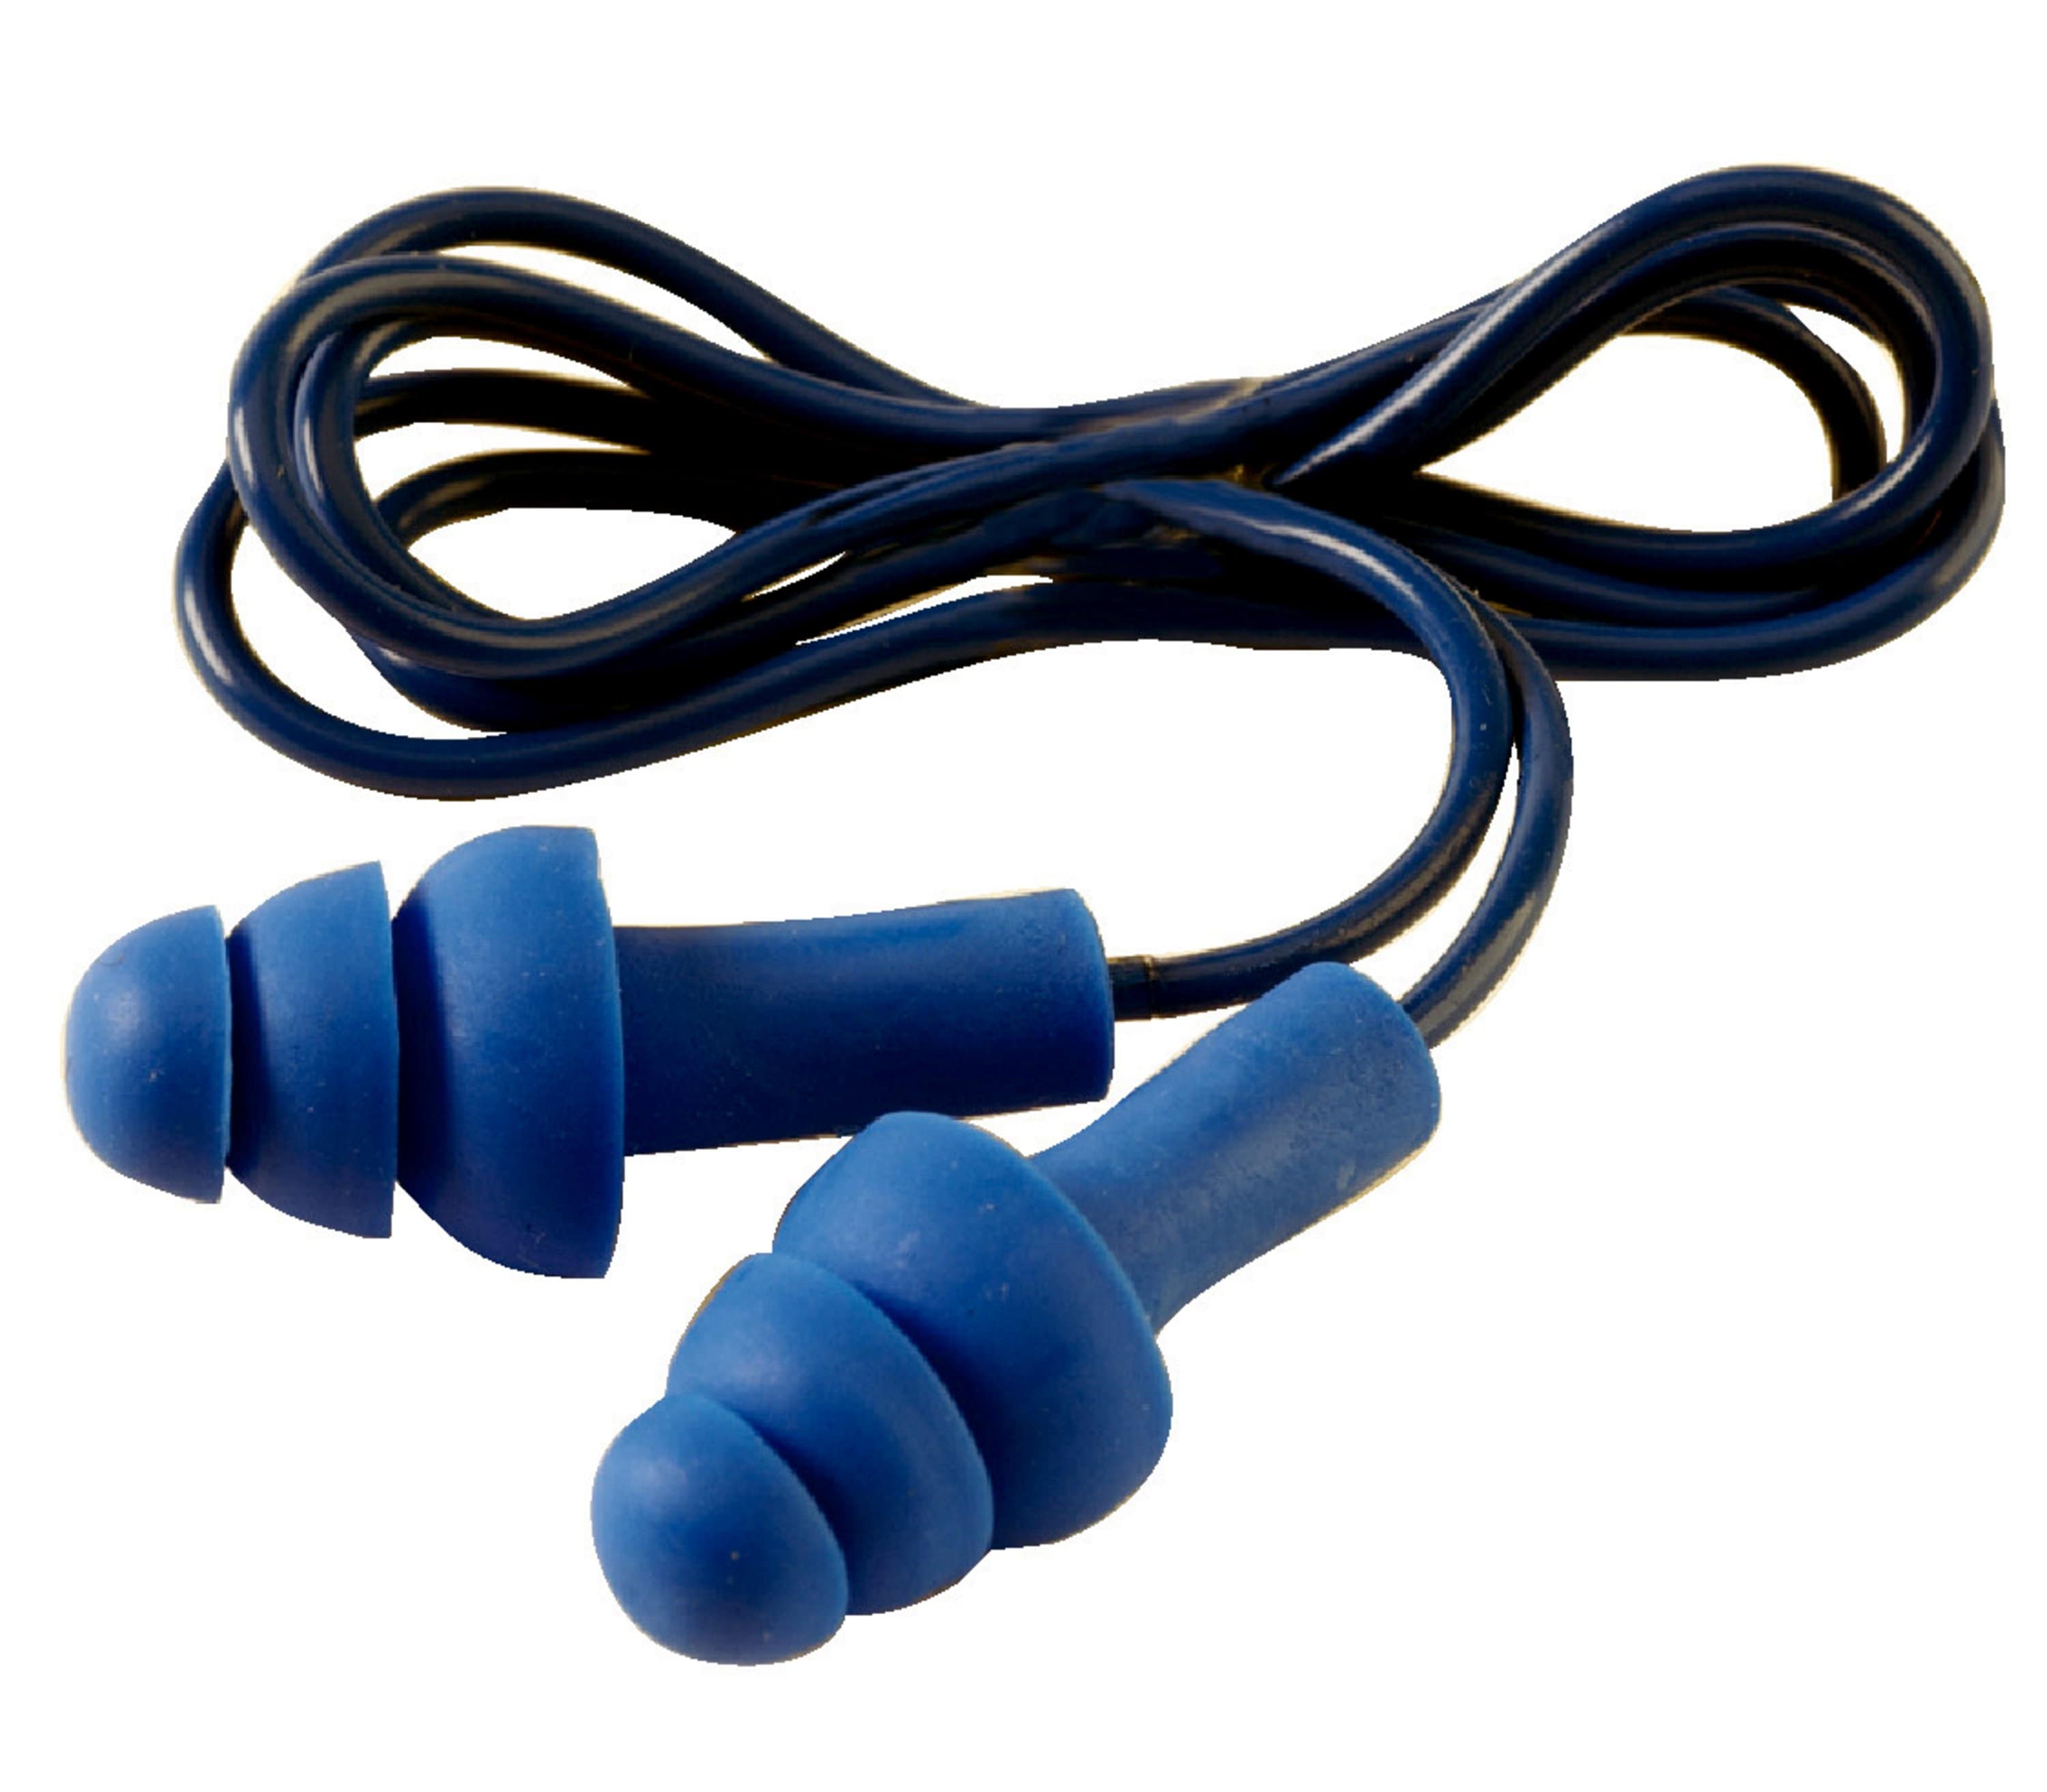 3M E.A.R Tracers Corded Reusable Ear Plugs, 32dB, Blue, 50 Pairs per Package